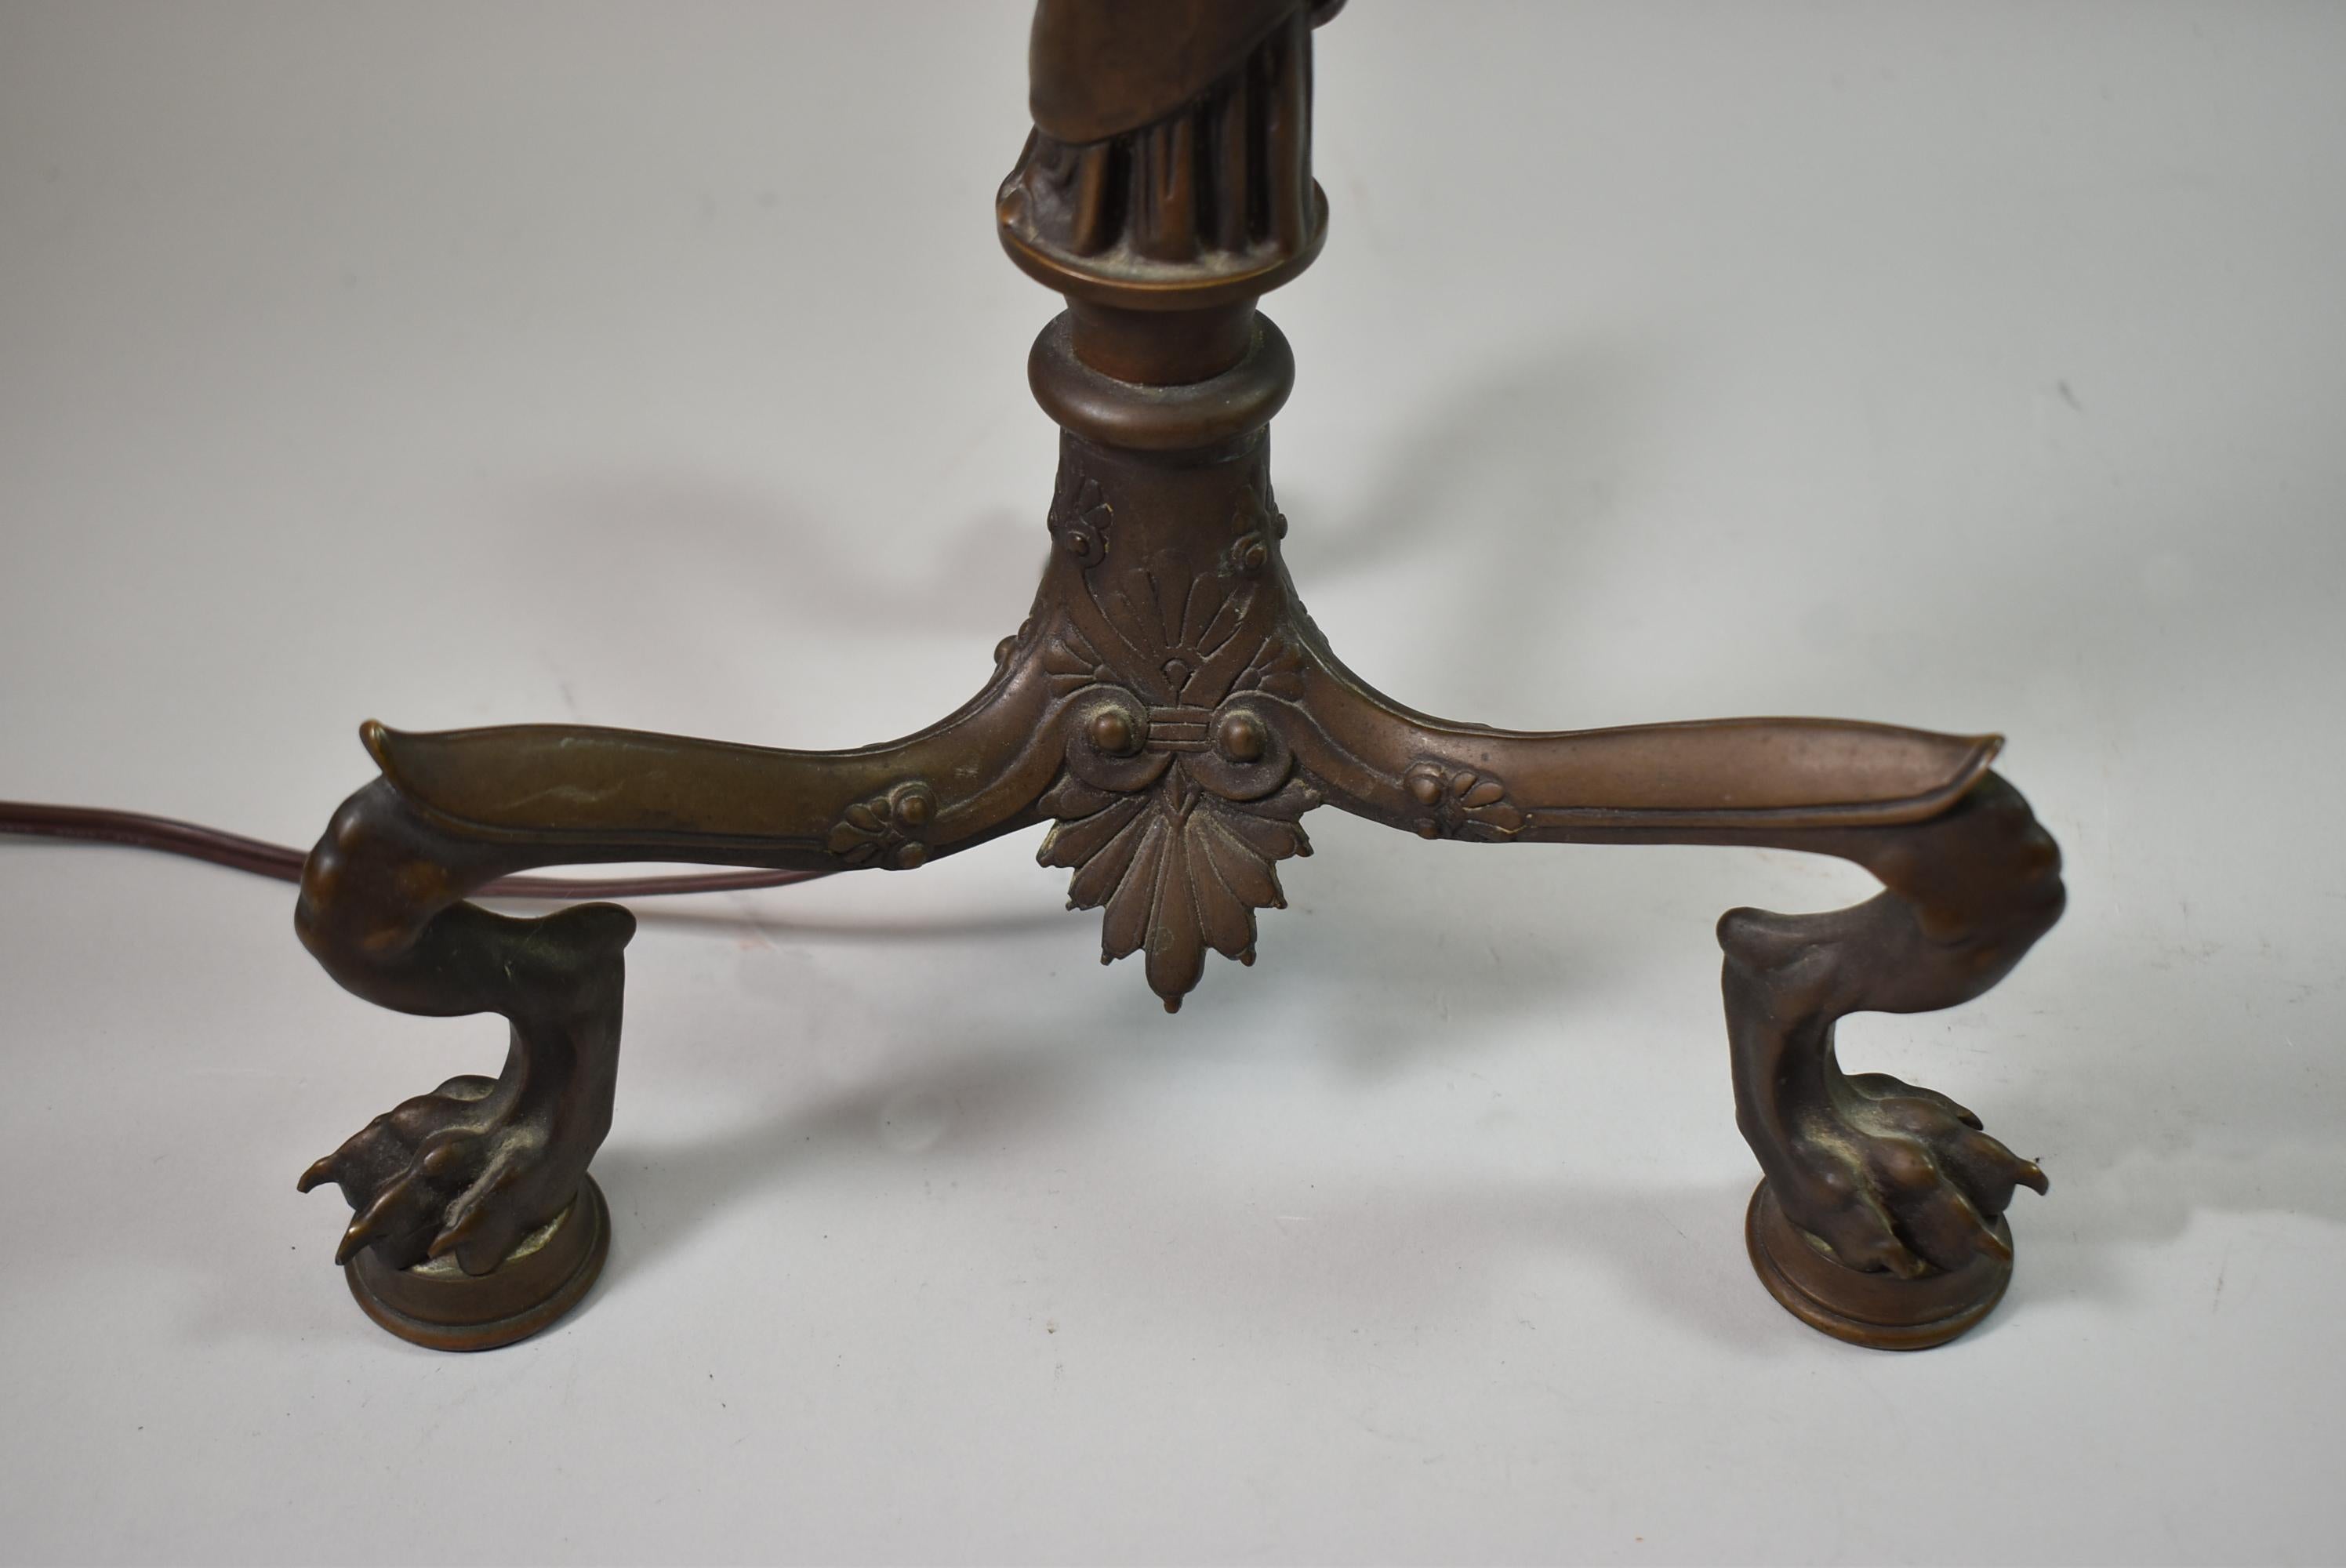 Italian style Neo- Classical bronze table lamp resting on three paw feet. Dimensions: 37